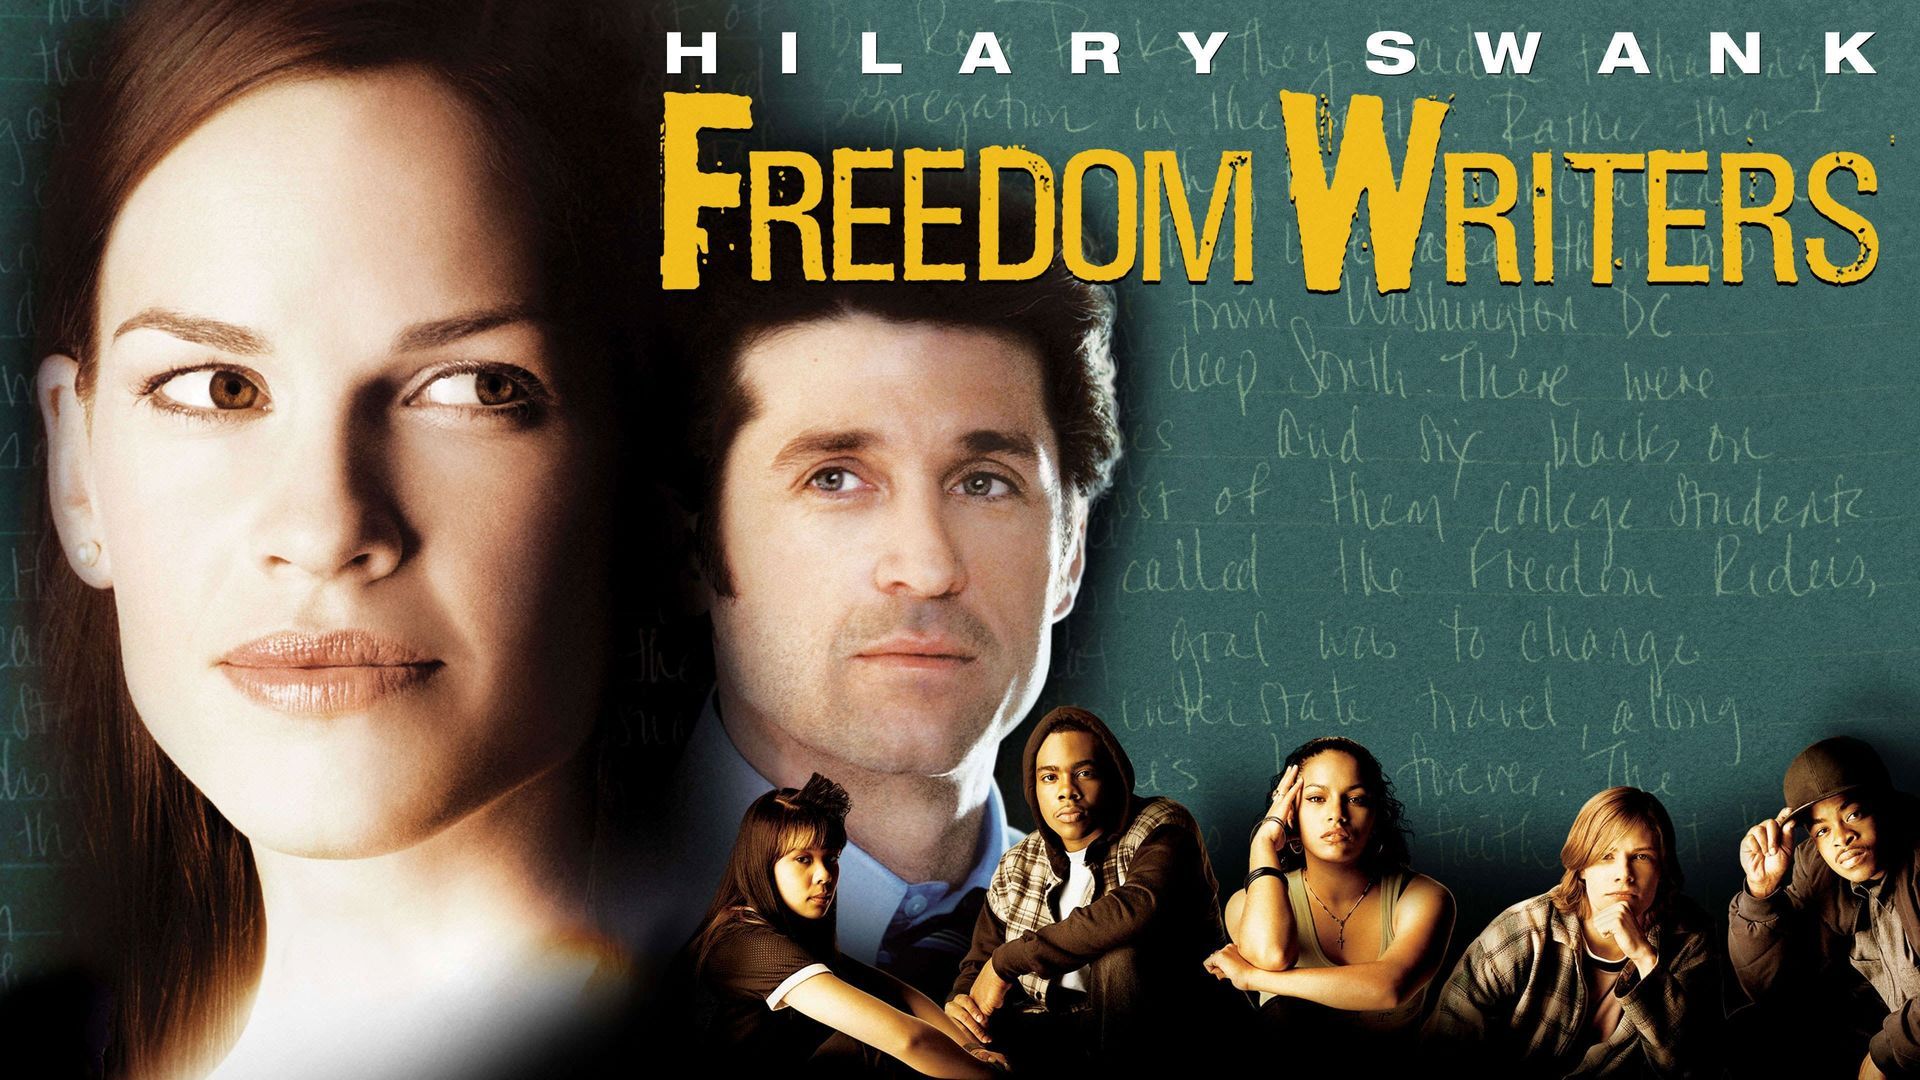 freedom writers film review essay